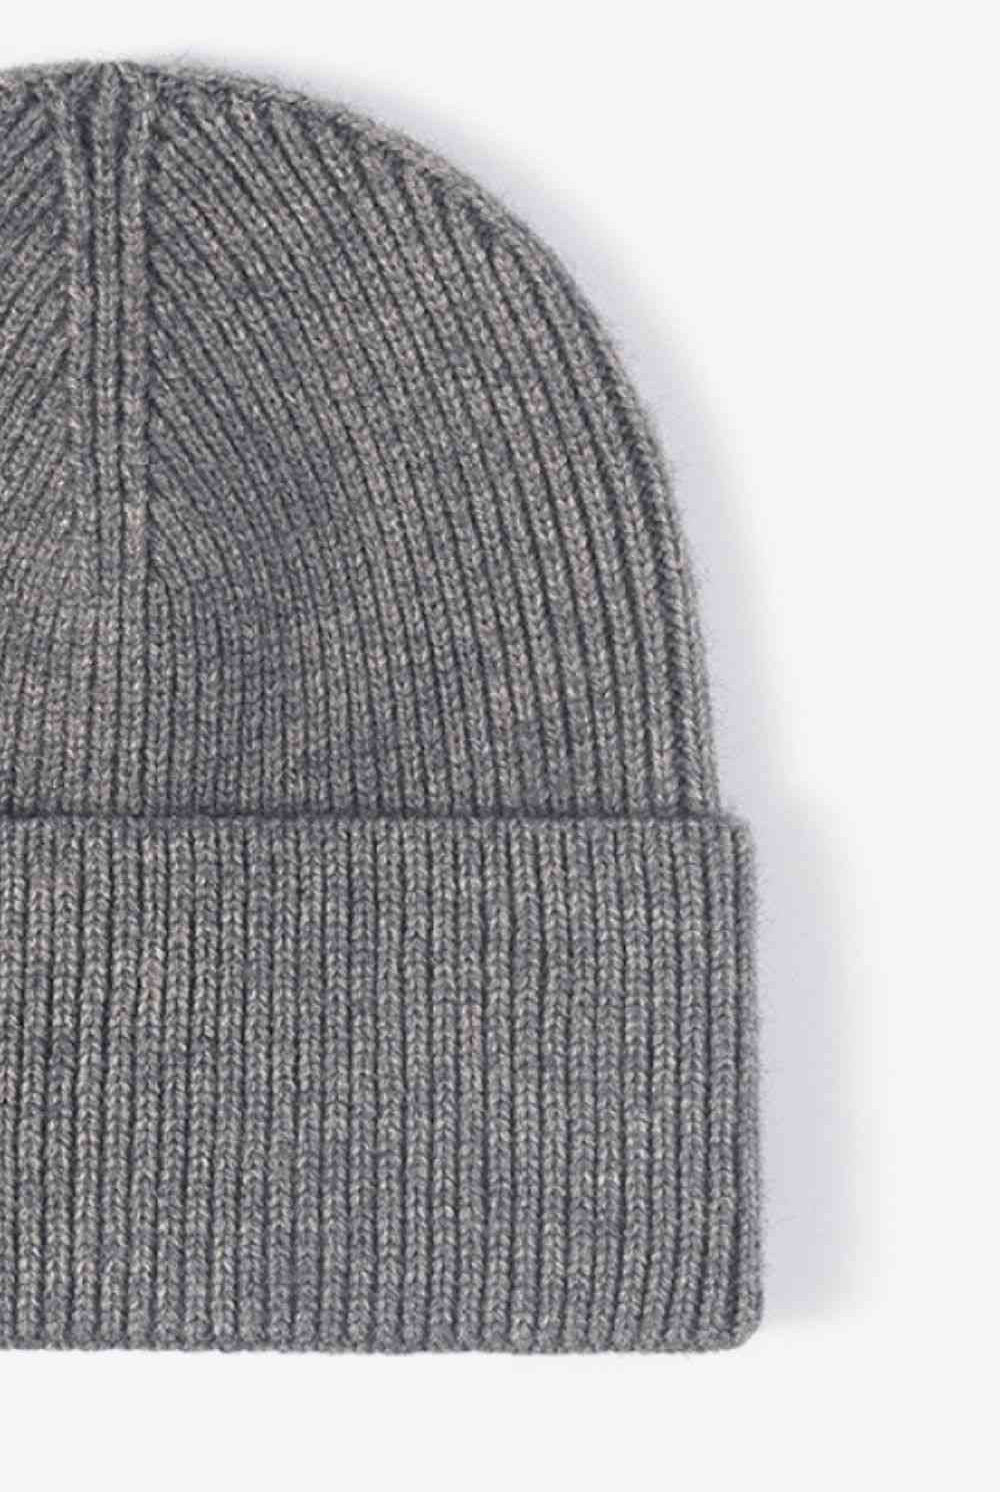 Light Gray Warm In Chilly Days Knit Beanie Winter Accessories